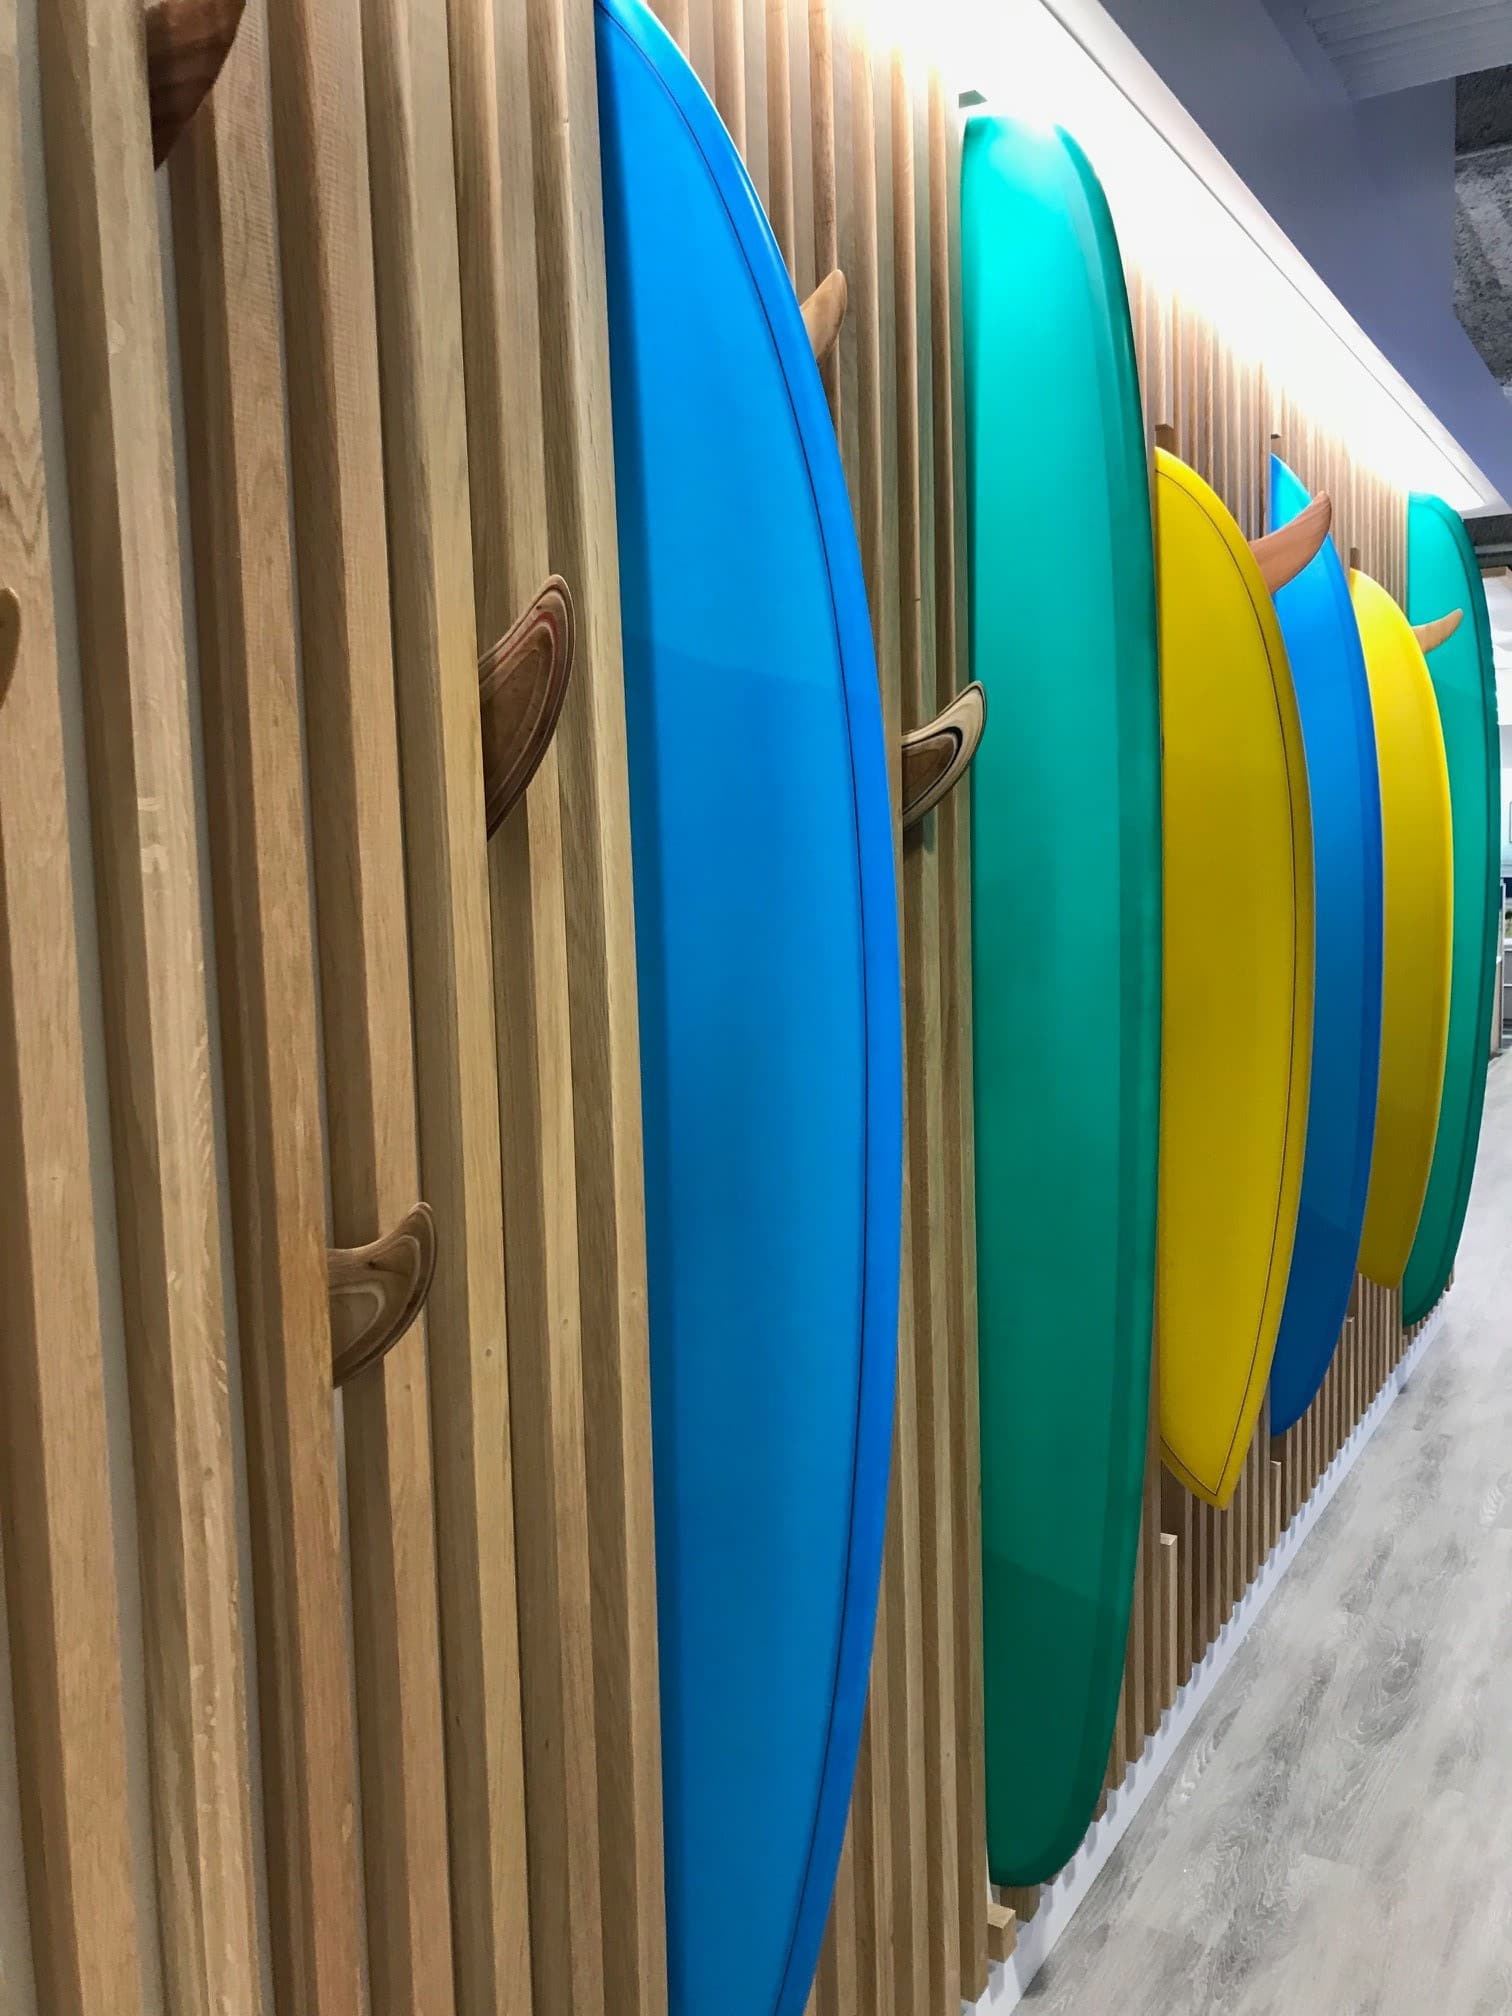 Voit Real Estate La Jolla Surfboard Feature Wall, Design and picture by ID Studios